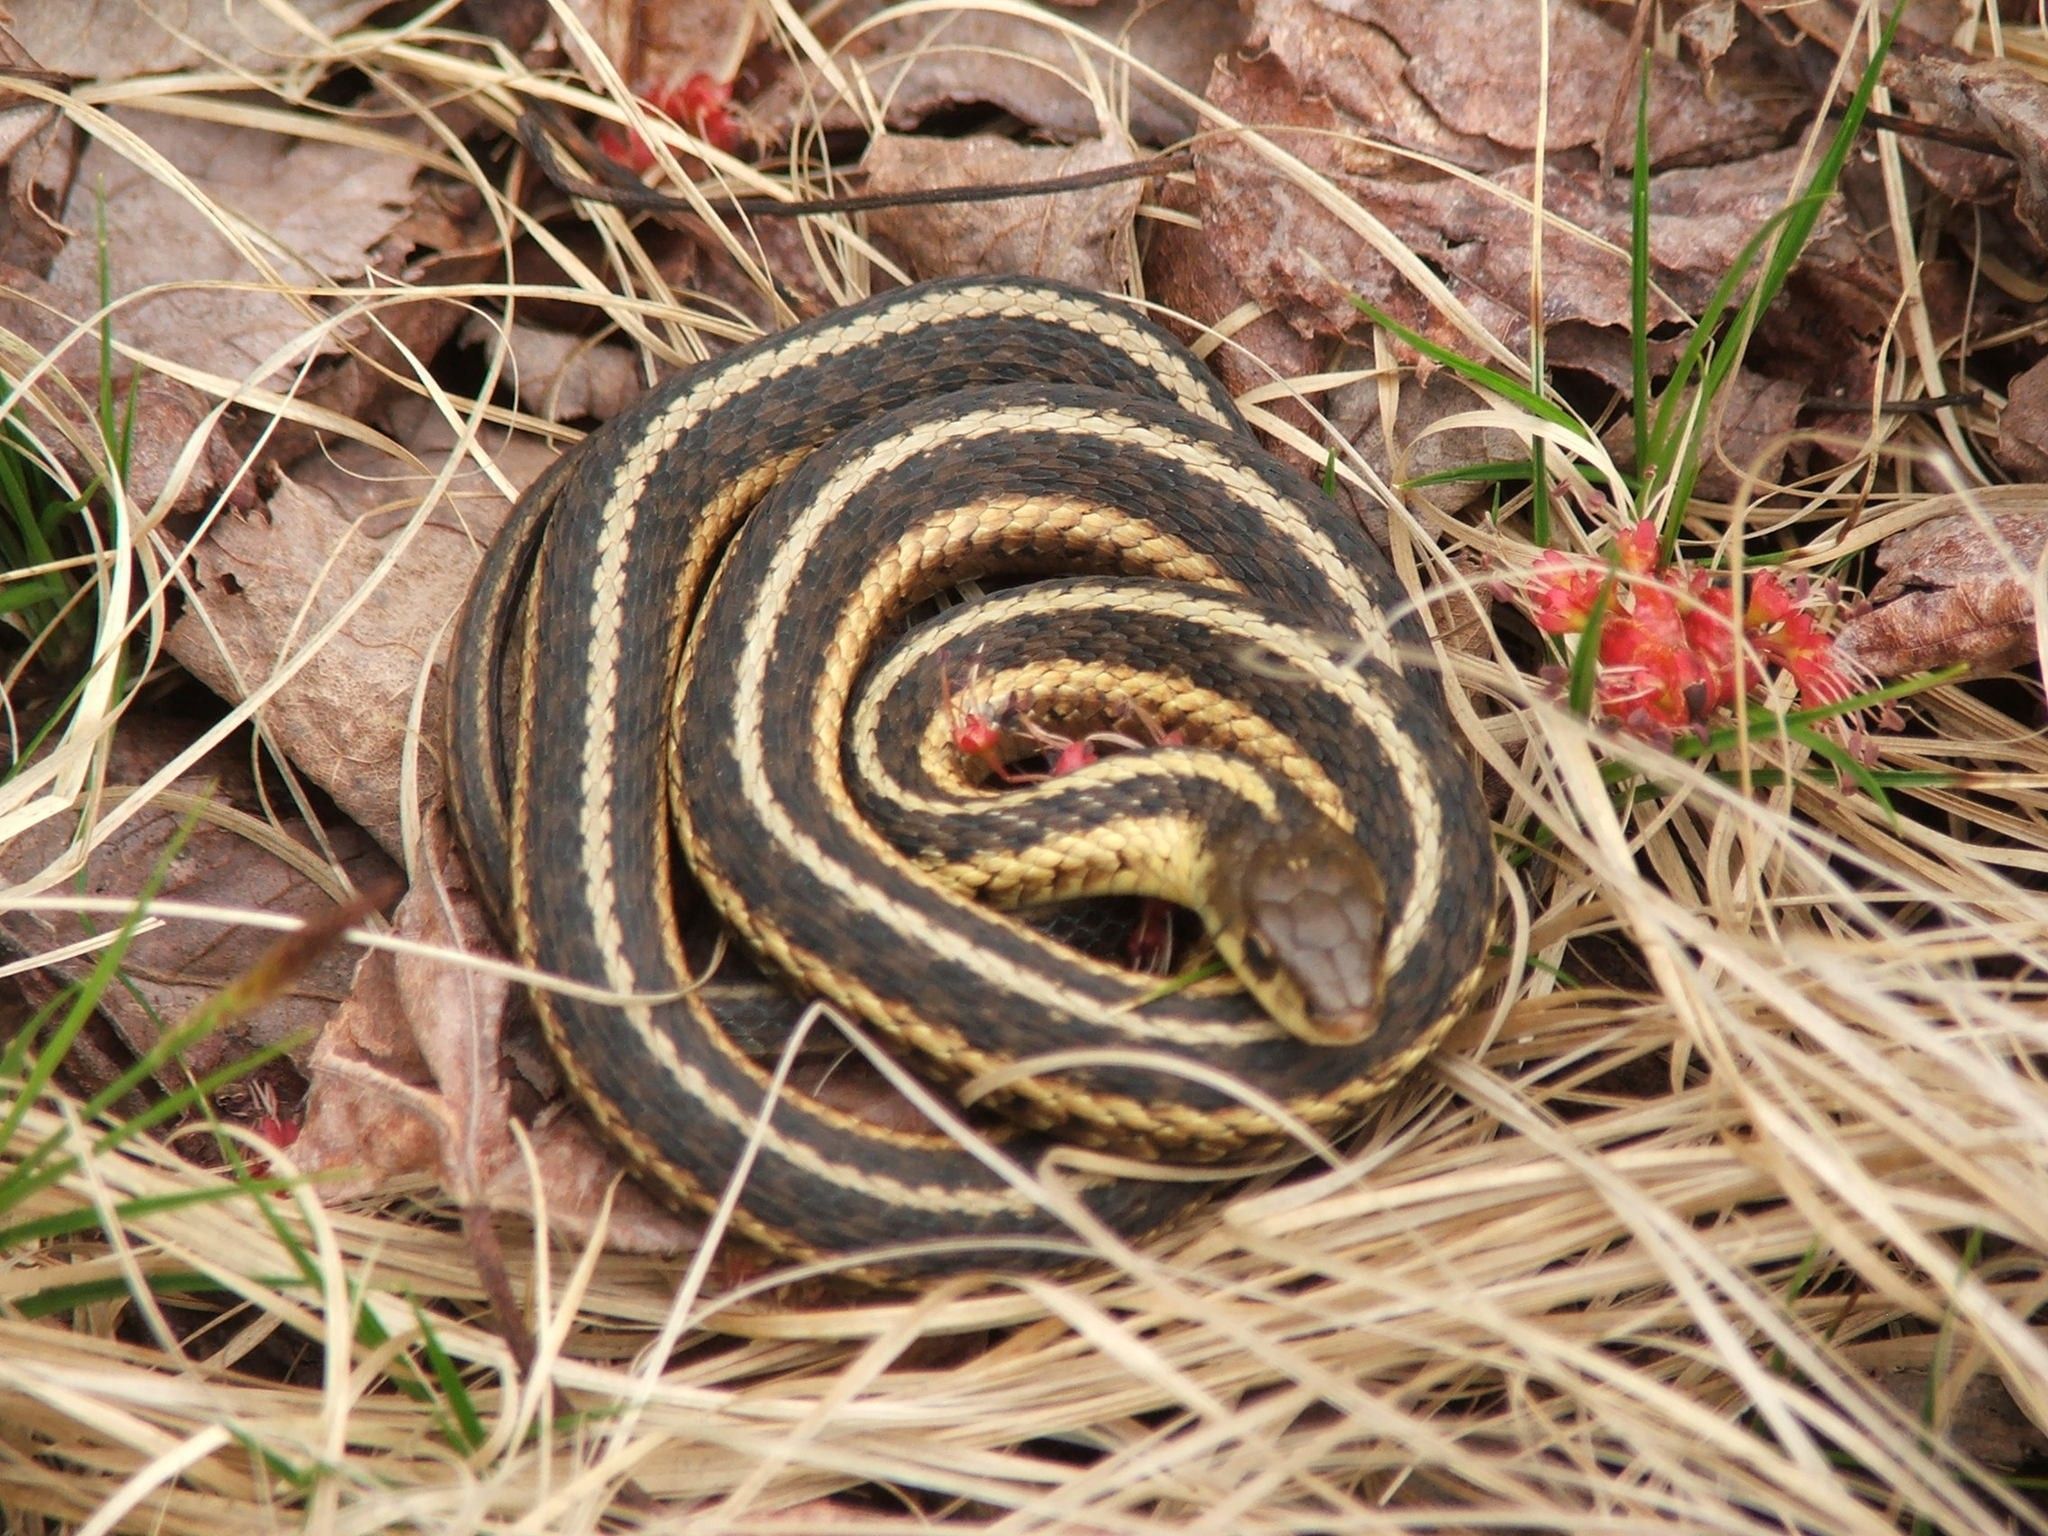 The 17 snakes you might meet in Michigan